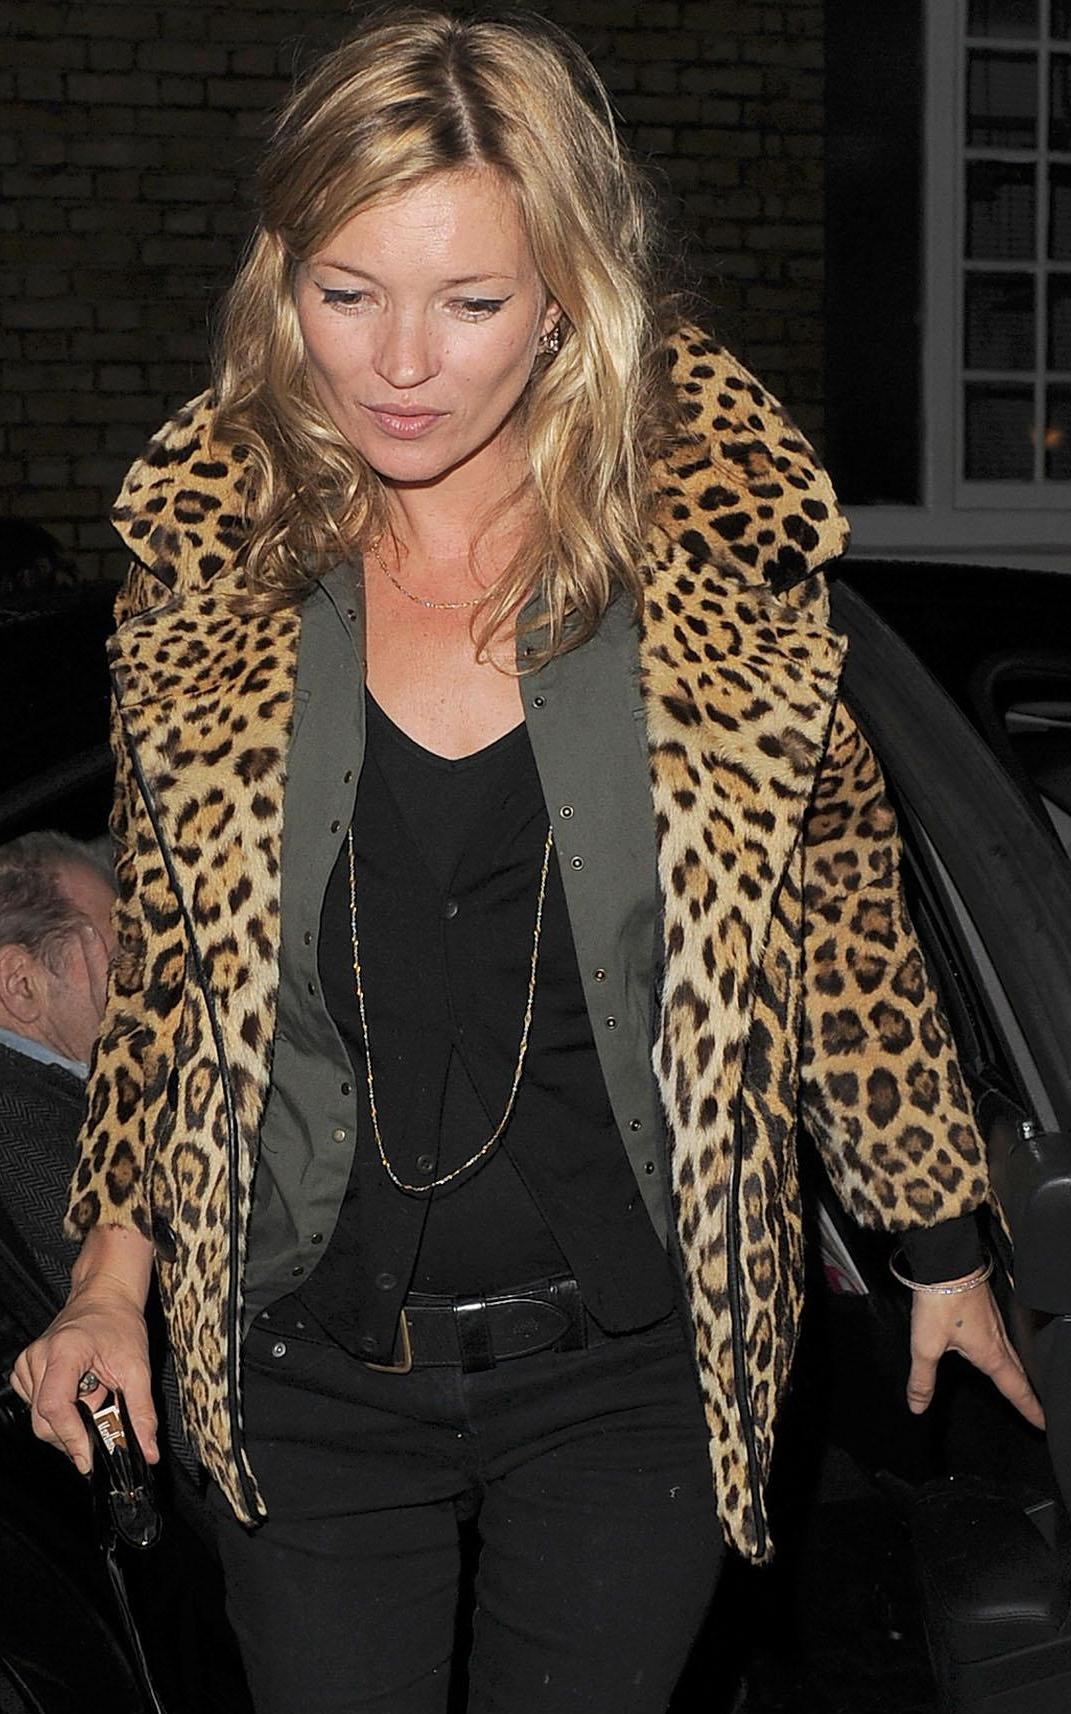 Kate Moss photo 1439 of 2296 pics, wallpaper - photo #672306 - ThePlace2